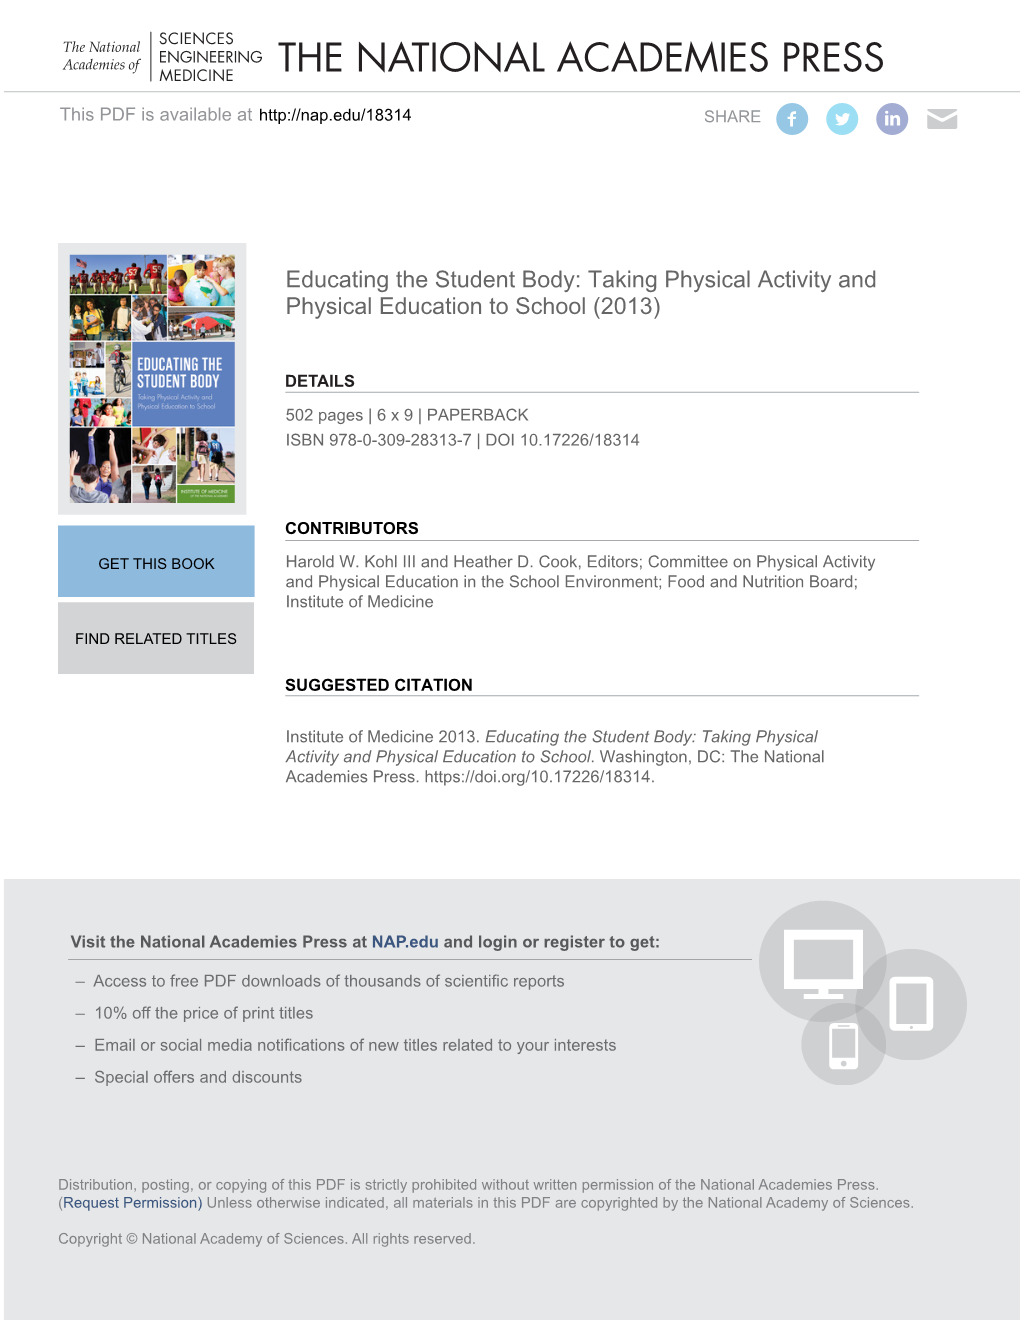 Taking Physical Activity and Physical Education to School (2013)